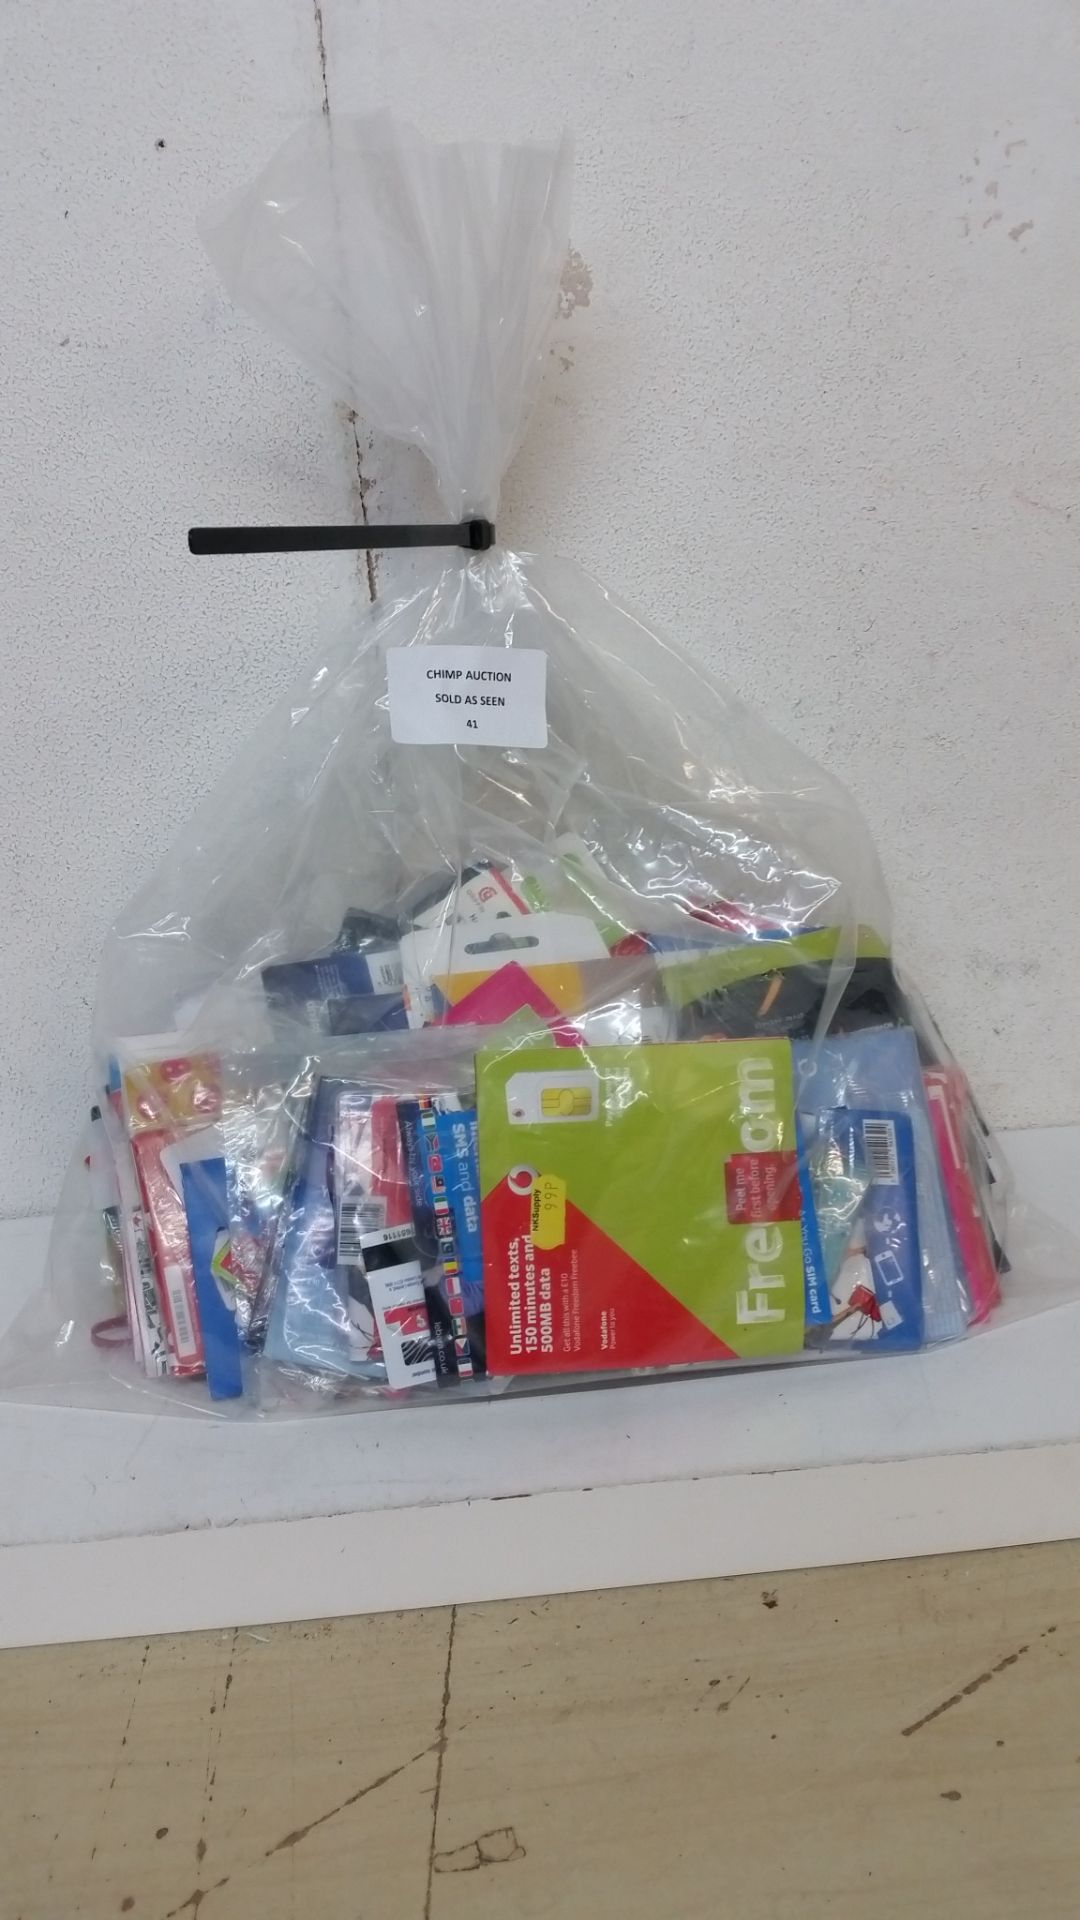 JOBLOT OF OVER 150 MIXED MOBILE PHONE SIM CARDS